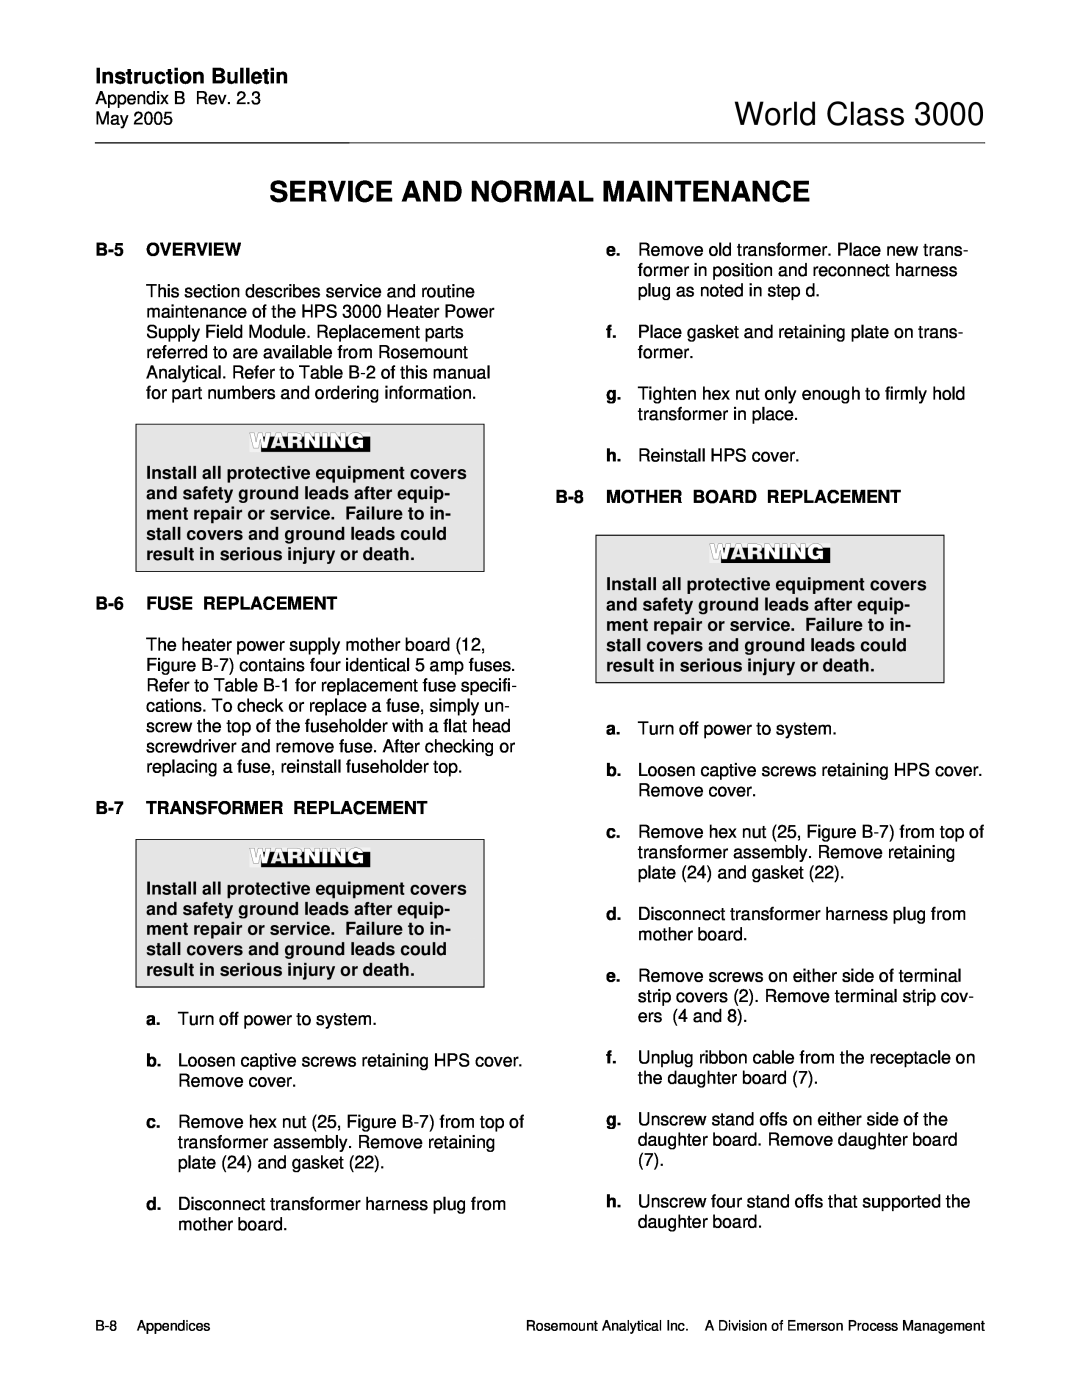 Emerson 3000 World Class, Service And Normal Maintenance, Instruction Bulletin, Overview, Fuse Replacement 